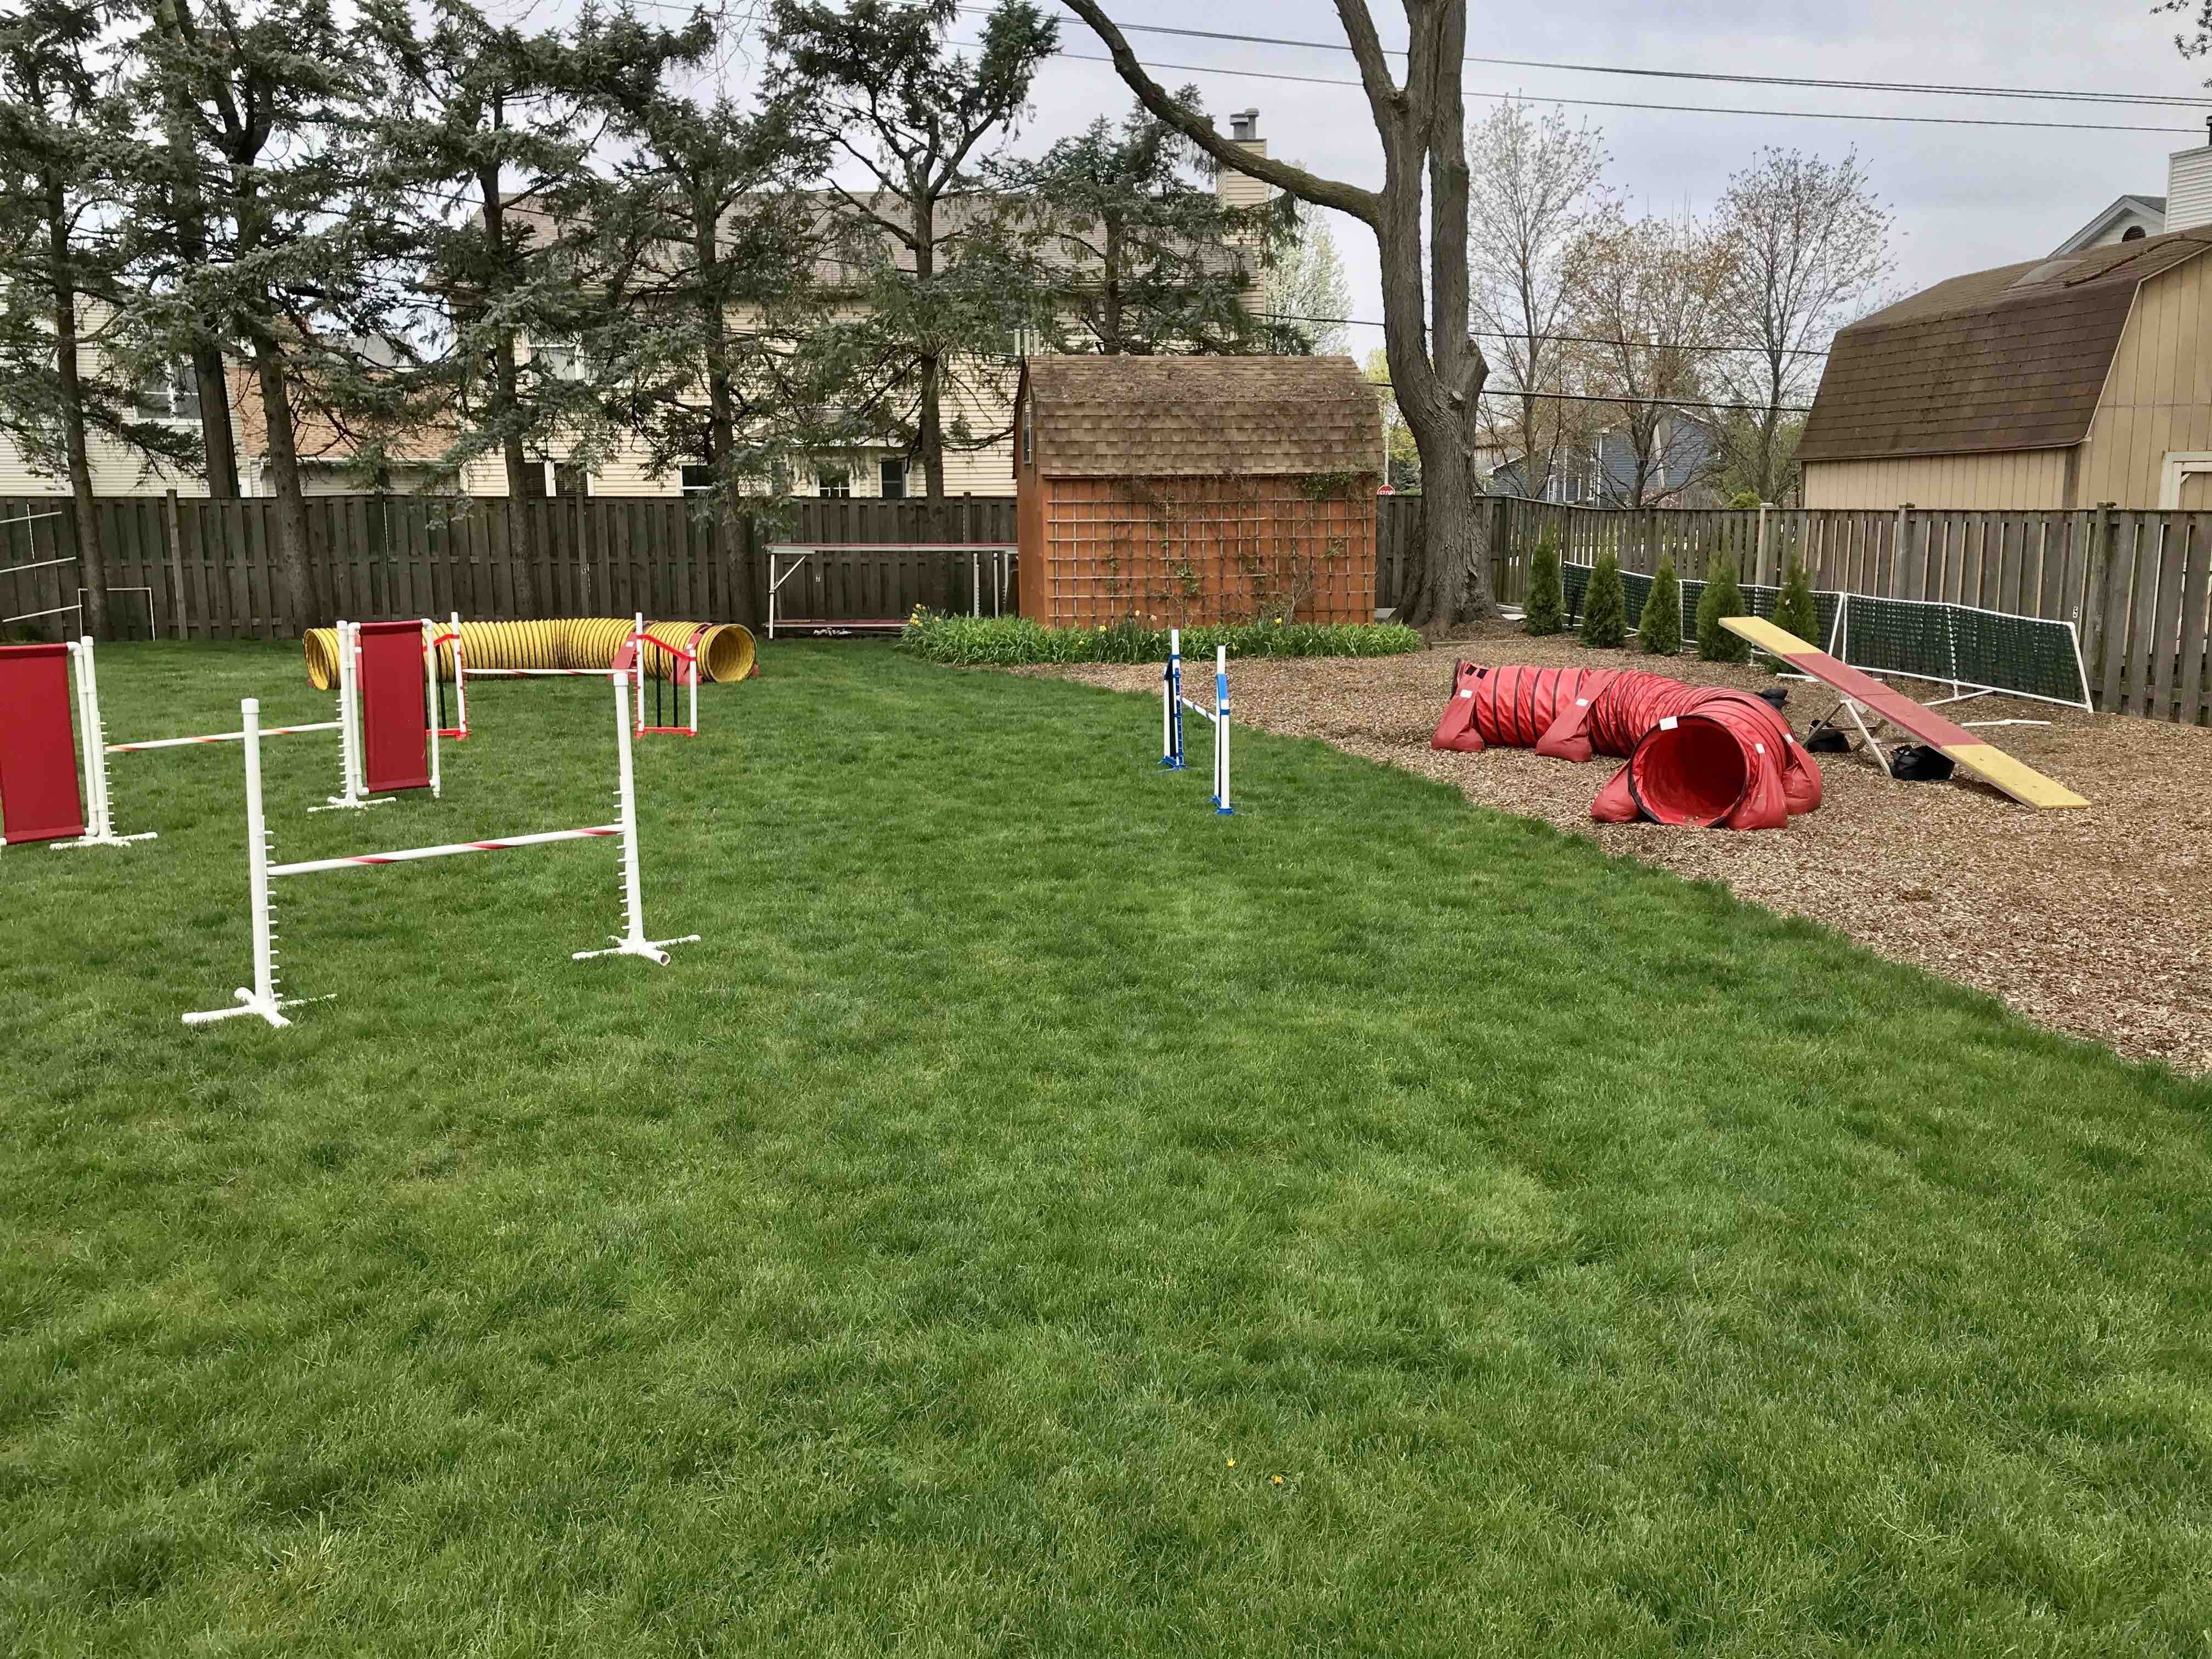 Simple Backyard Obstacle Course For Your Dog - May 20, 2021